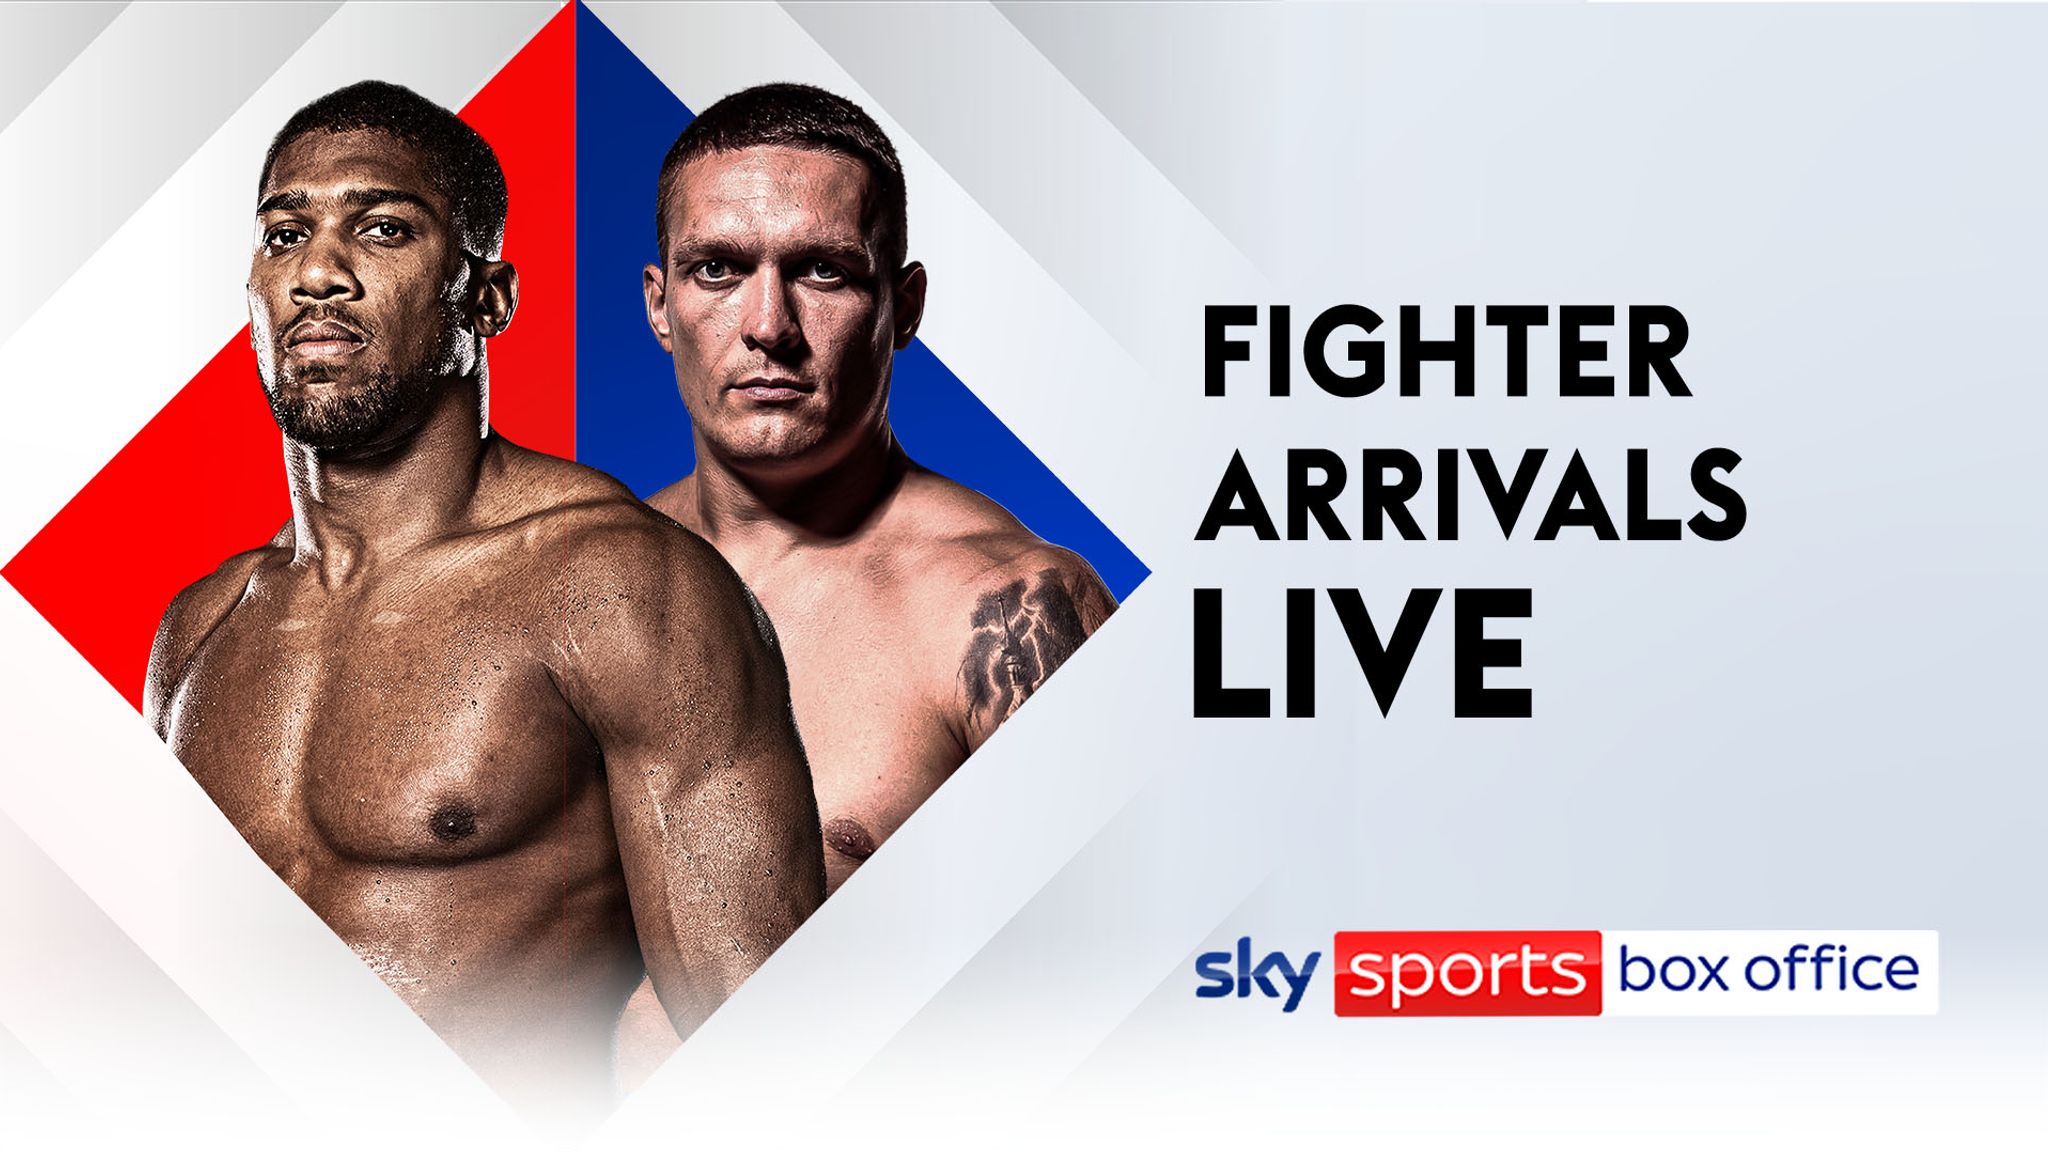 Oleksandr Usyk vs Anthony Joshua Watch the live stream as the fighters make their grand arrivals from 4.30pm Boxing News Sky Sports